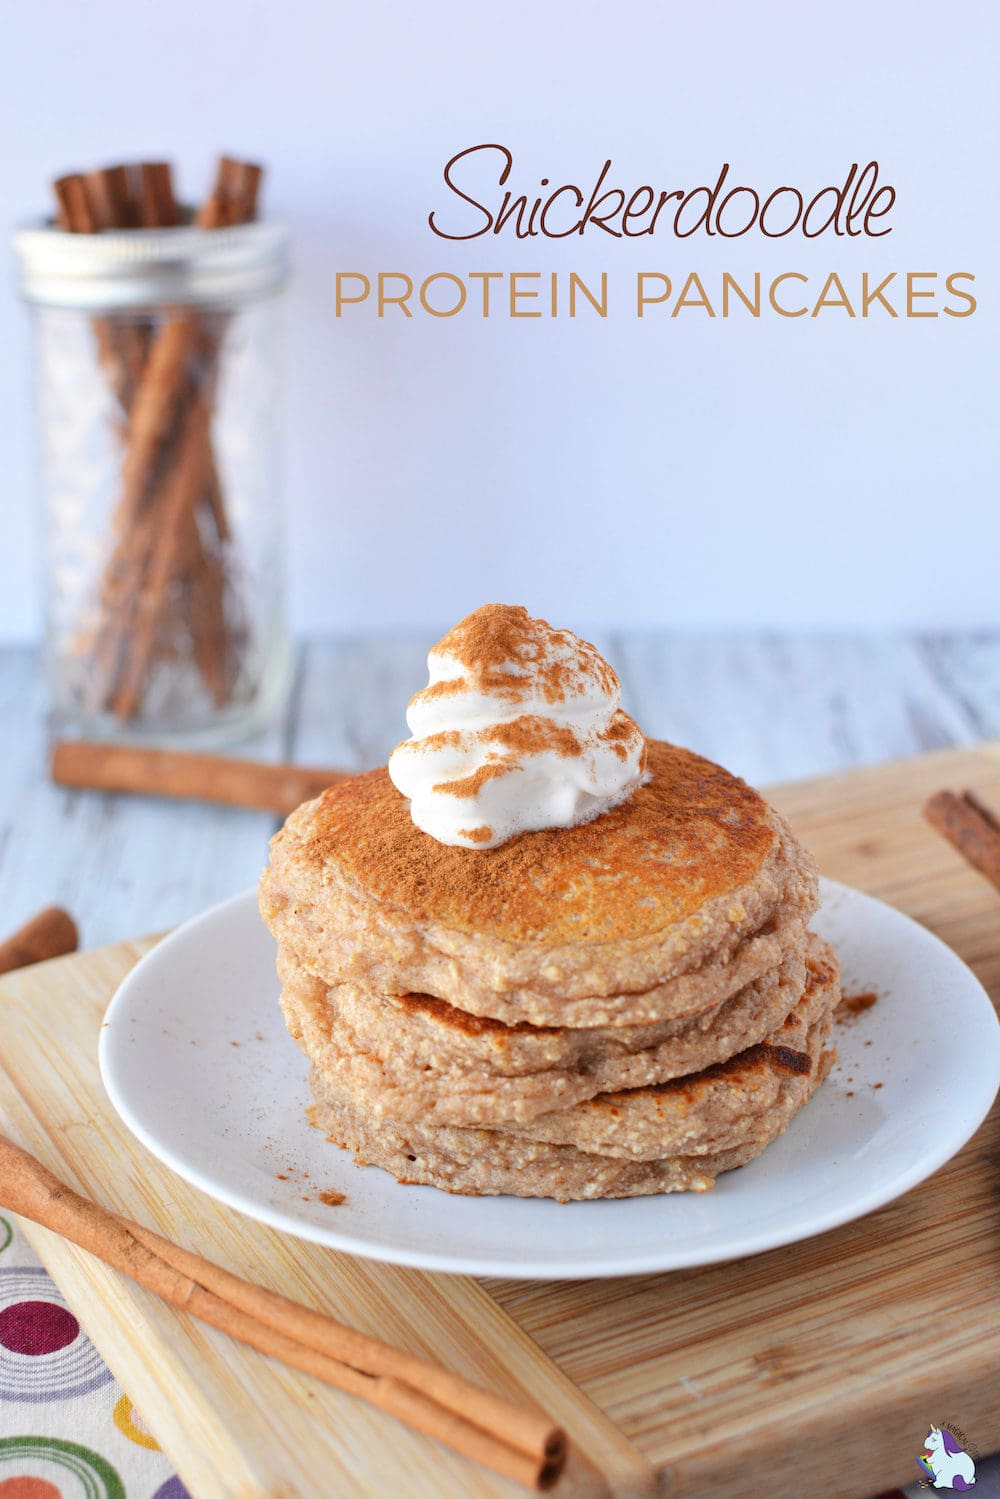 Snickerdoodle protein pancakes with whipped cream and cinnamon on top.